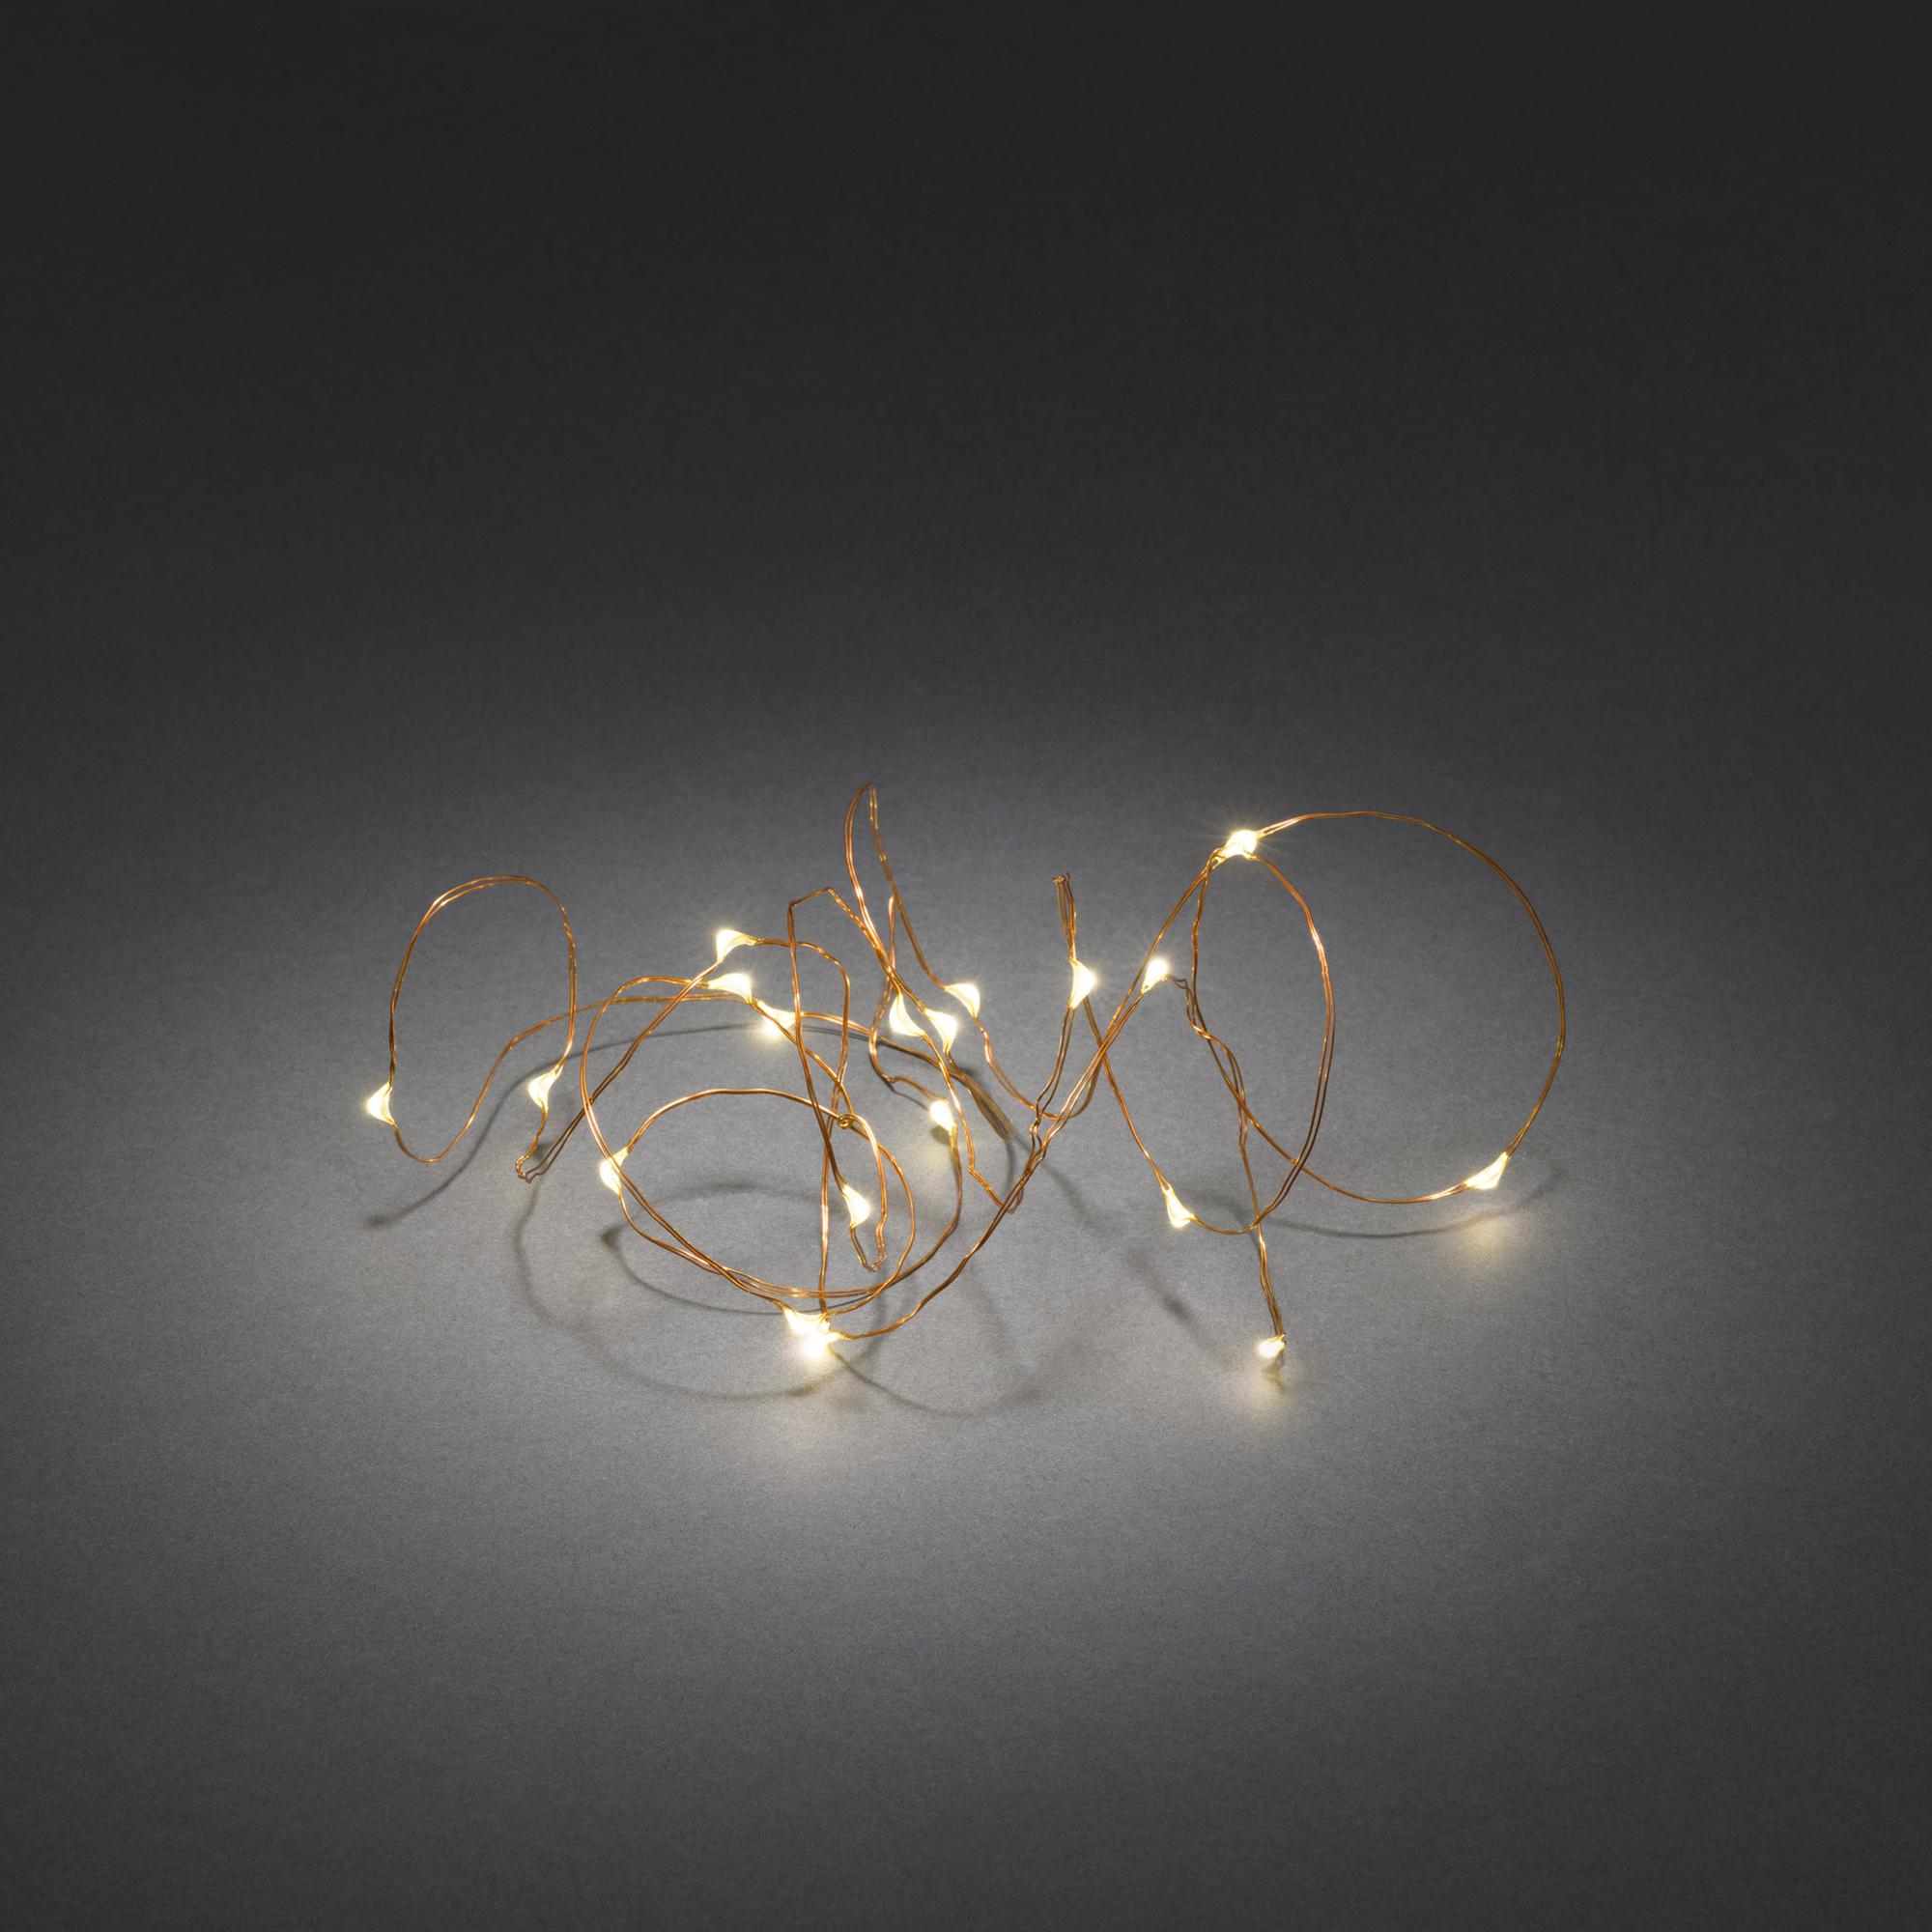 LED Light Chain warm white, 2.4m (20 LEDs), 6h timer, Battery Operated, copper